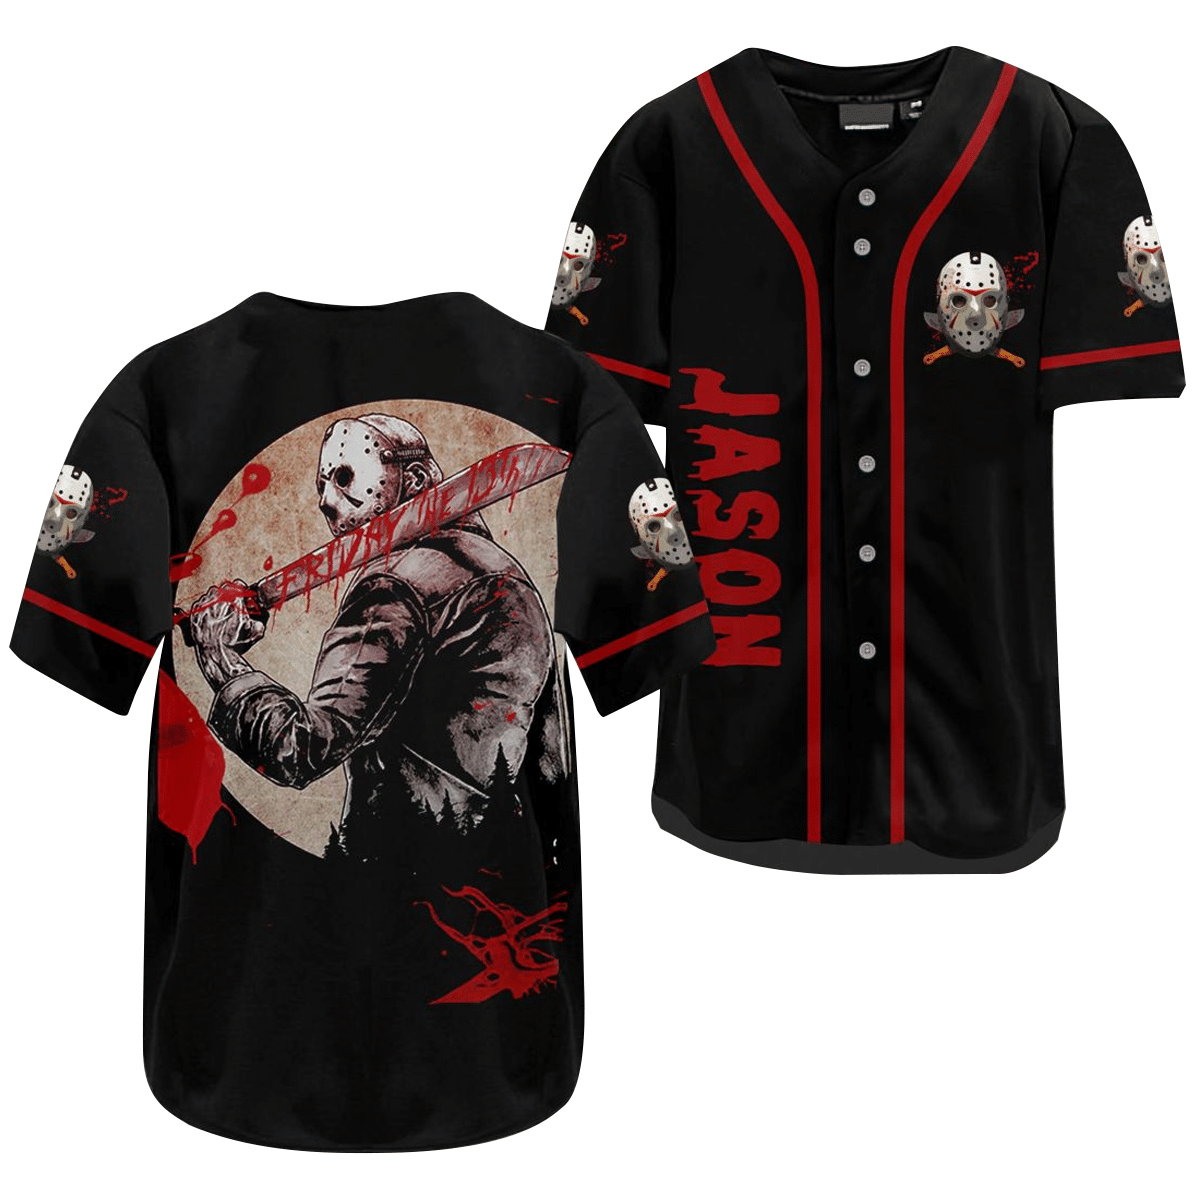 Jason With Bloody Knife Friday the 13th Baseball Jersey